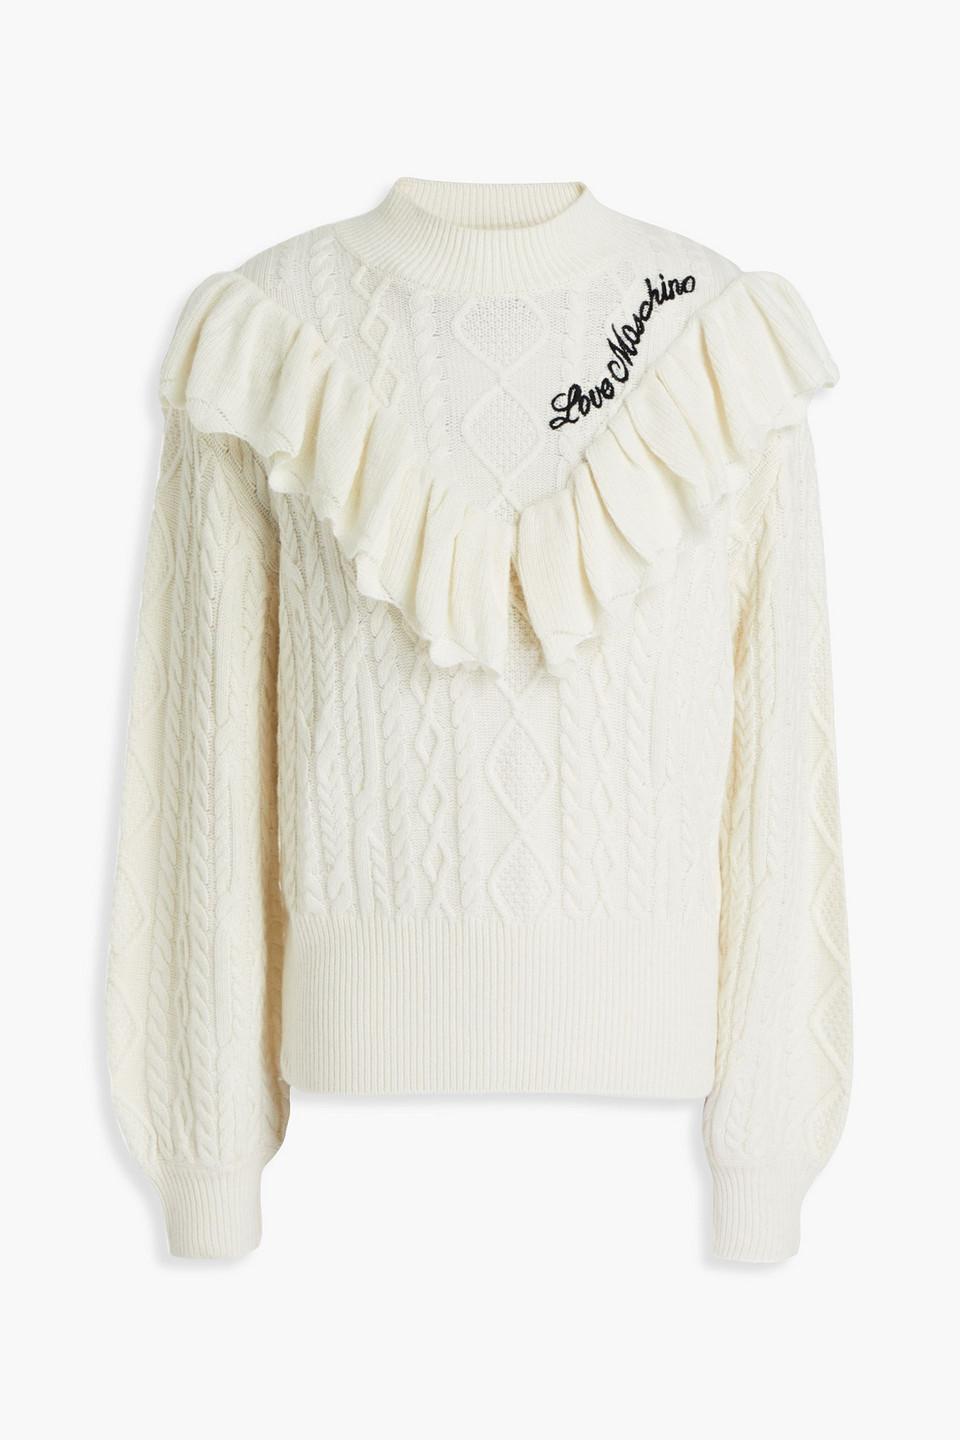 Love Moschino Embroidered Ruffled Cable-knit Turtleneck Sweater in White |  Lyst Canada